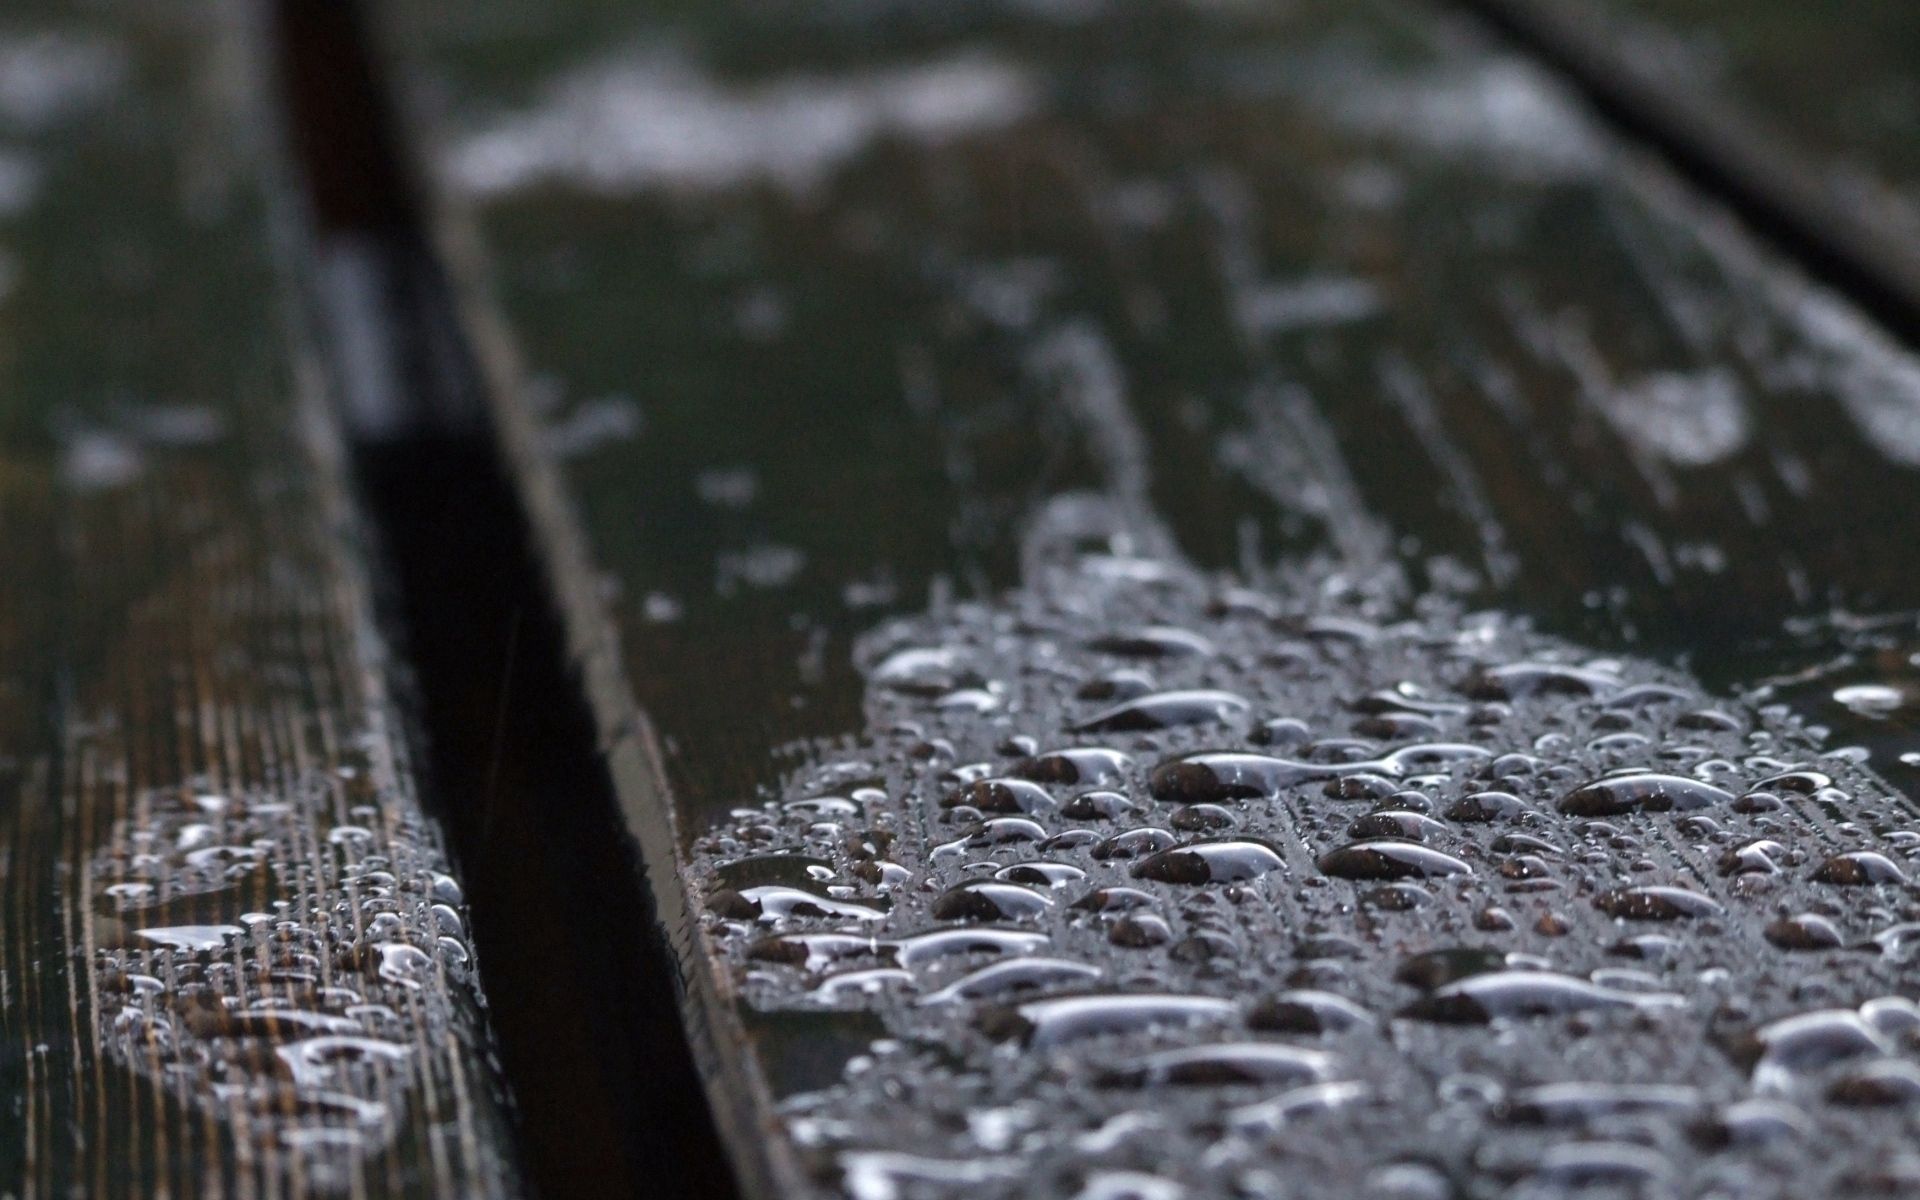 drops, macro, wood, wooden, wet, surface, humid High Definition image